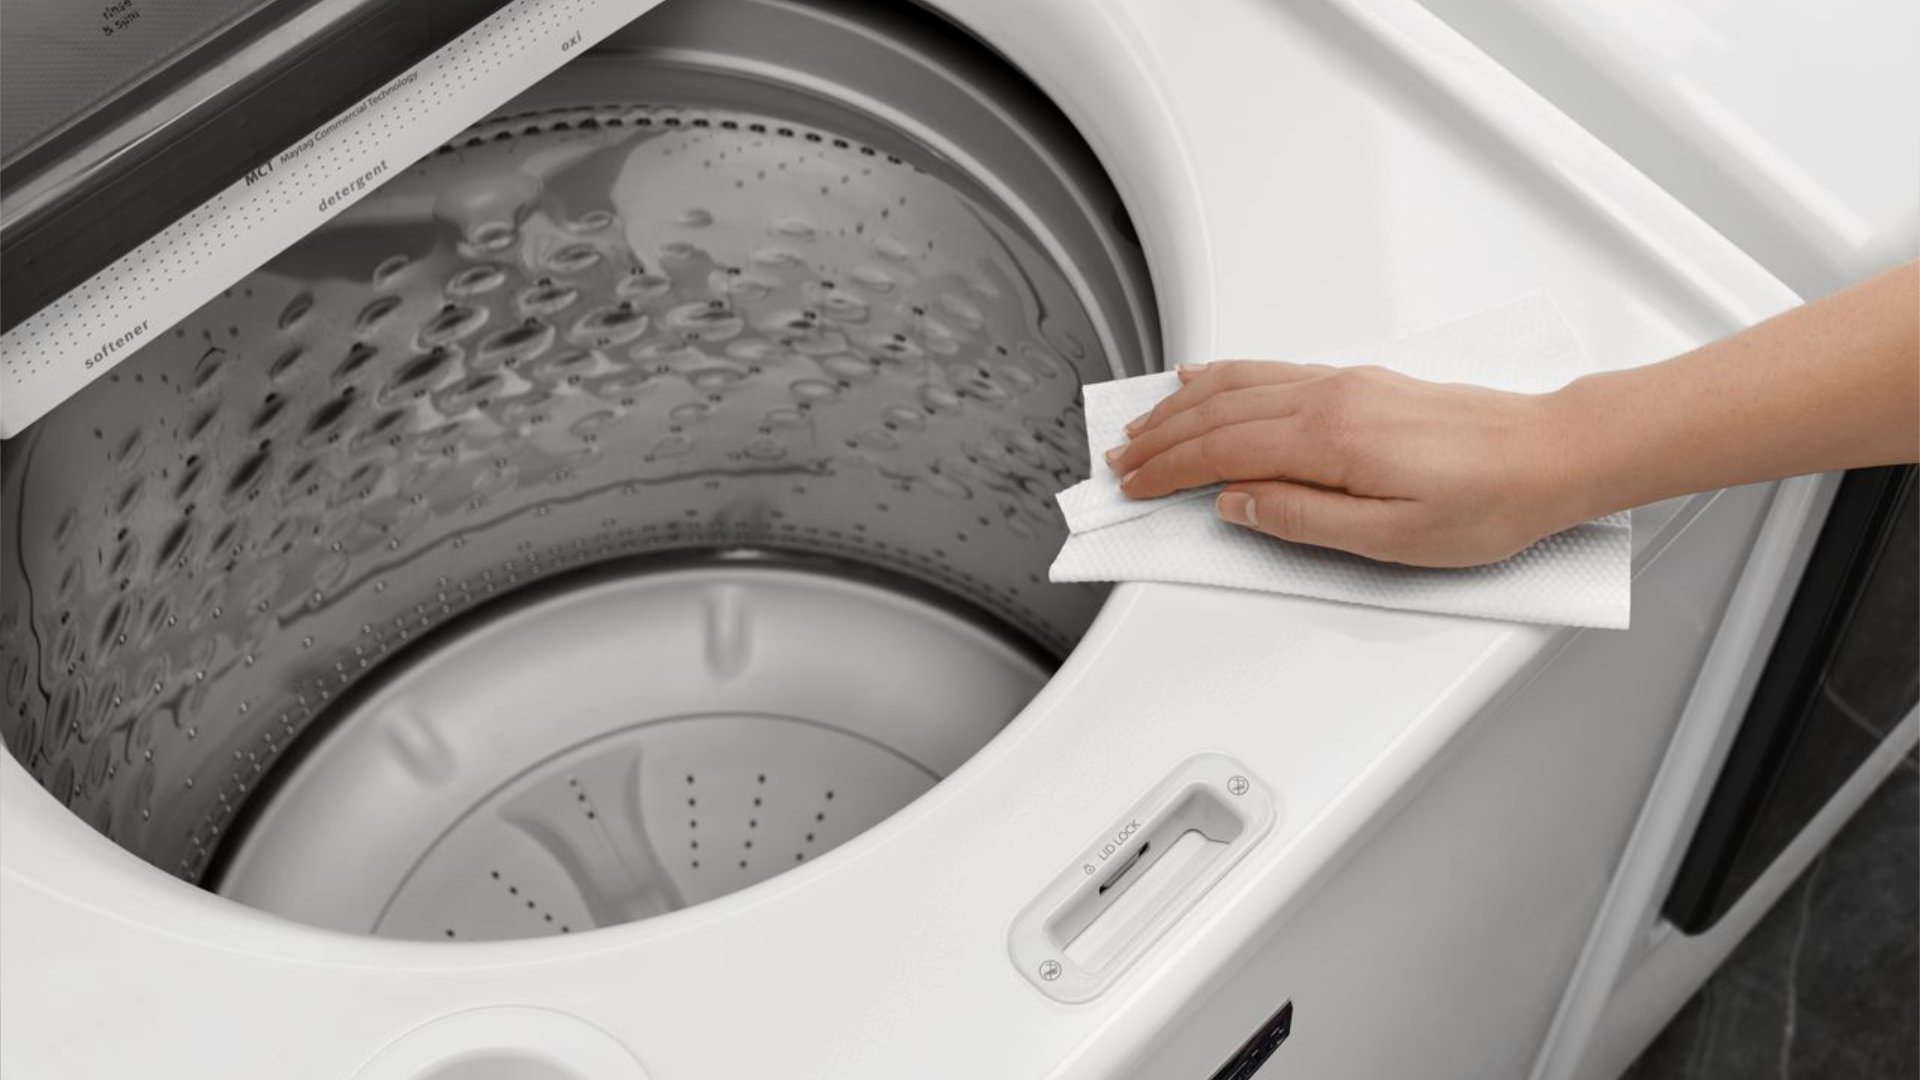 Does Whirlpool Washer Have a Filter?